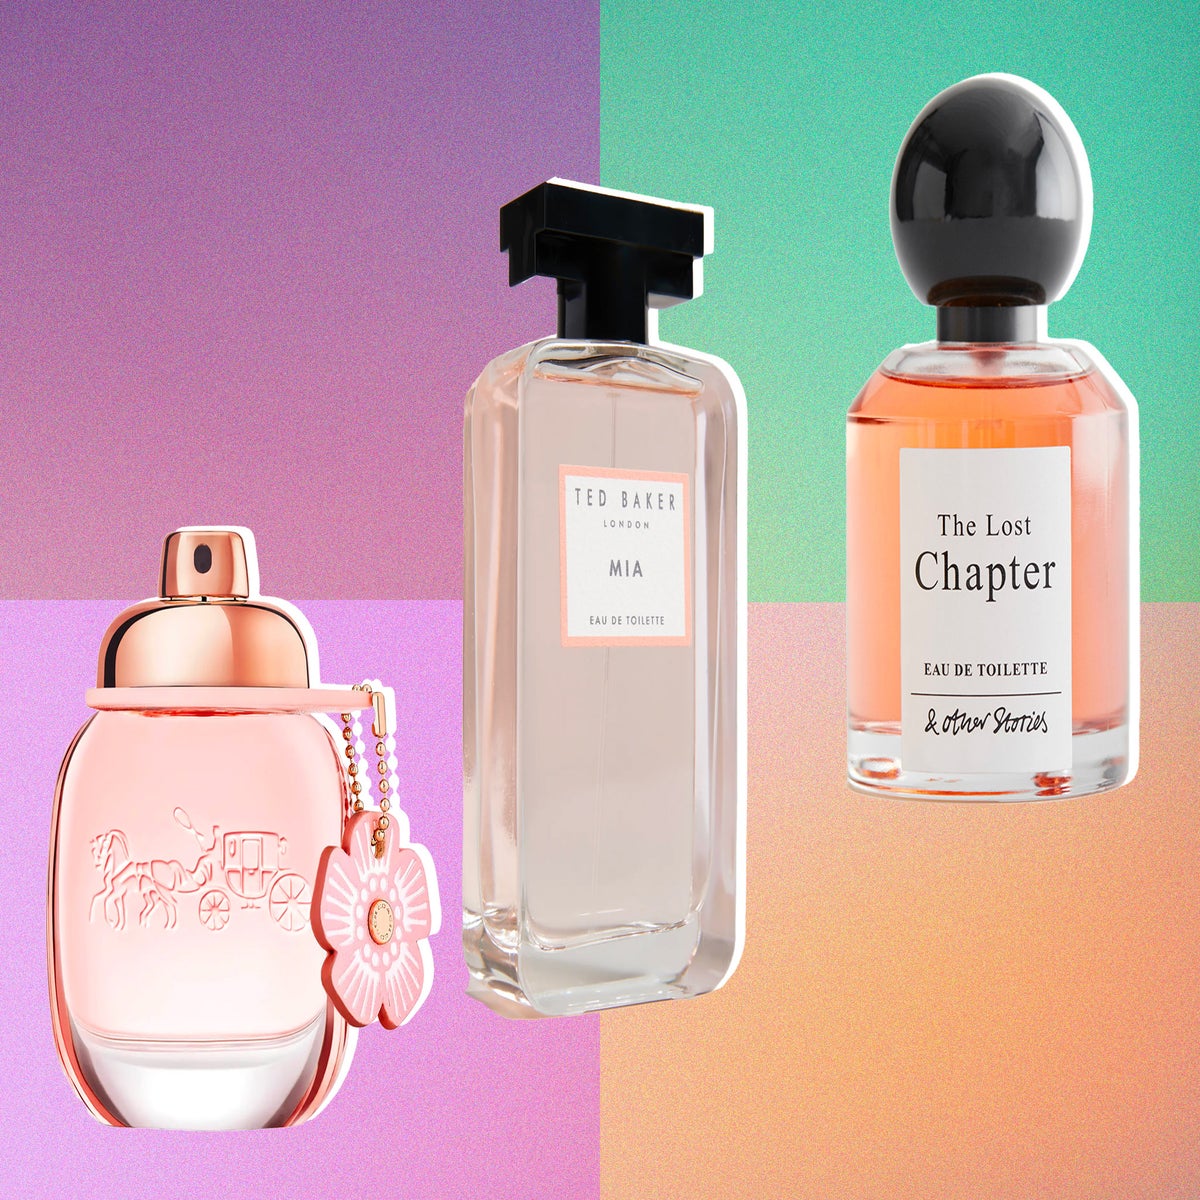 Retail Chain Looking for a New Perfume Bottle Design